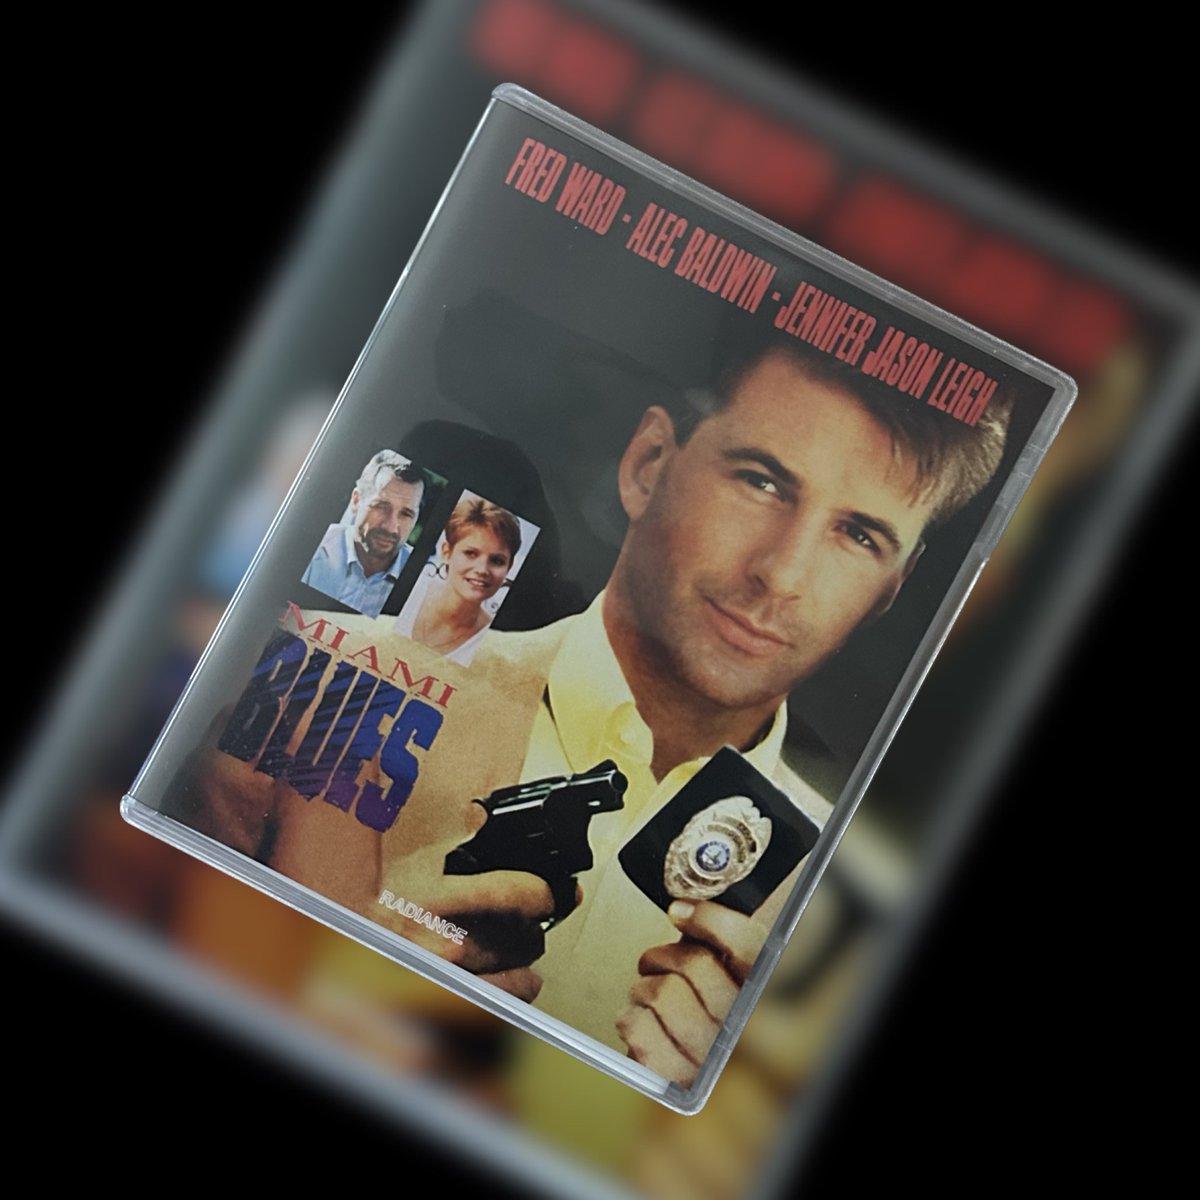 One of the first releases from @Frangipane13's @FilmsRadiance & it's one of my favourites, 1990's MIAMI BLUES starring Fred Ward, Alec Baldwin & Jennifer Jason Leigh. The Obi Strip is a nice touch #radiancefilms #miamiblues #bluray #fredward #alecbaldwin #jenniferjasonleigh